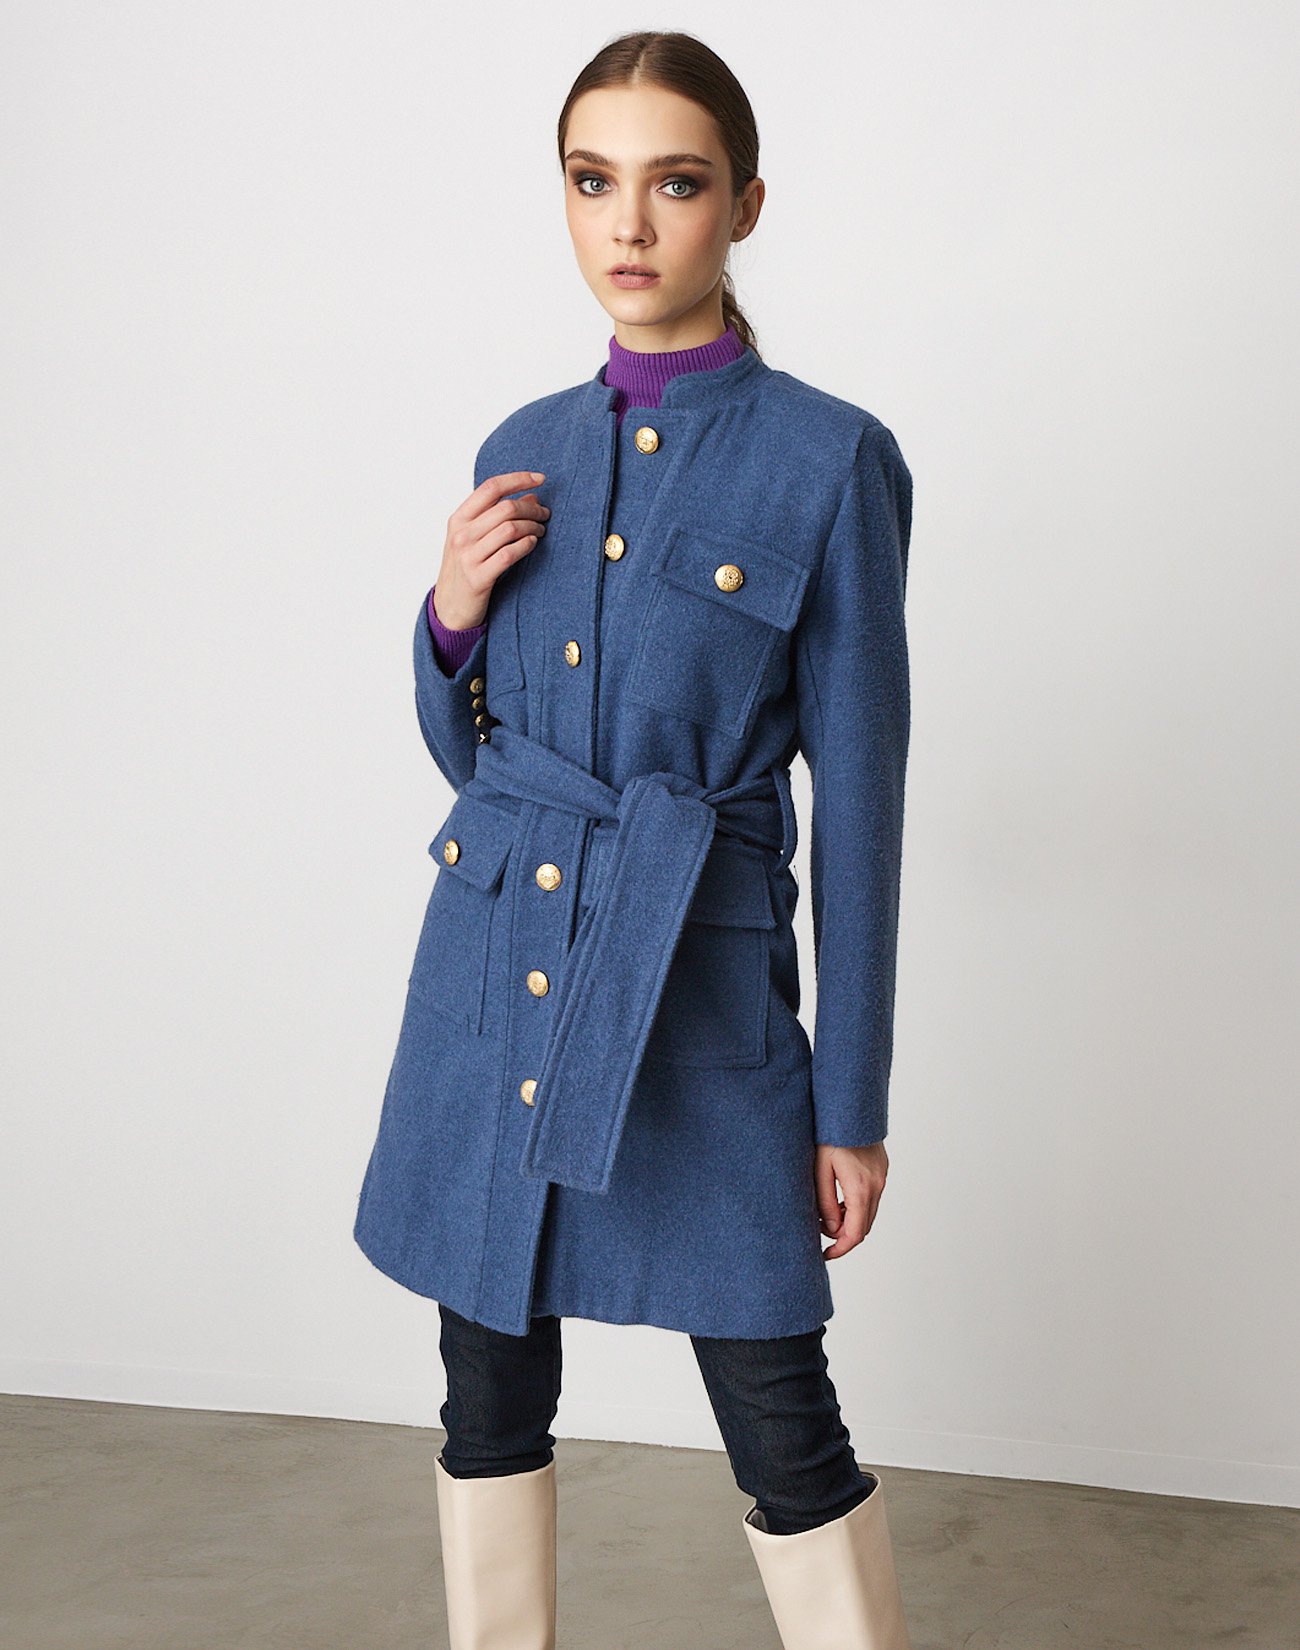 Coat with golden buttons